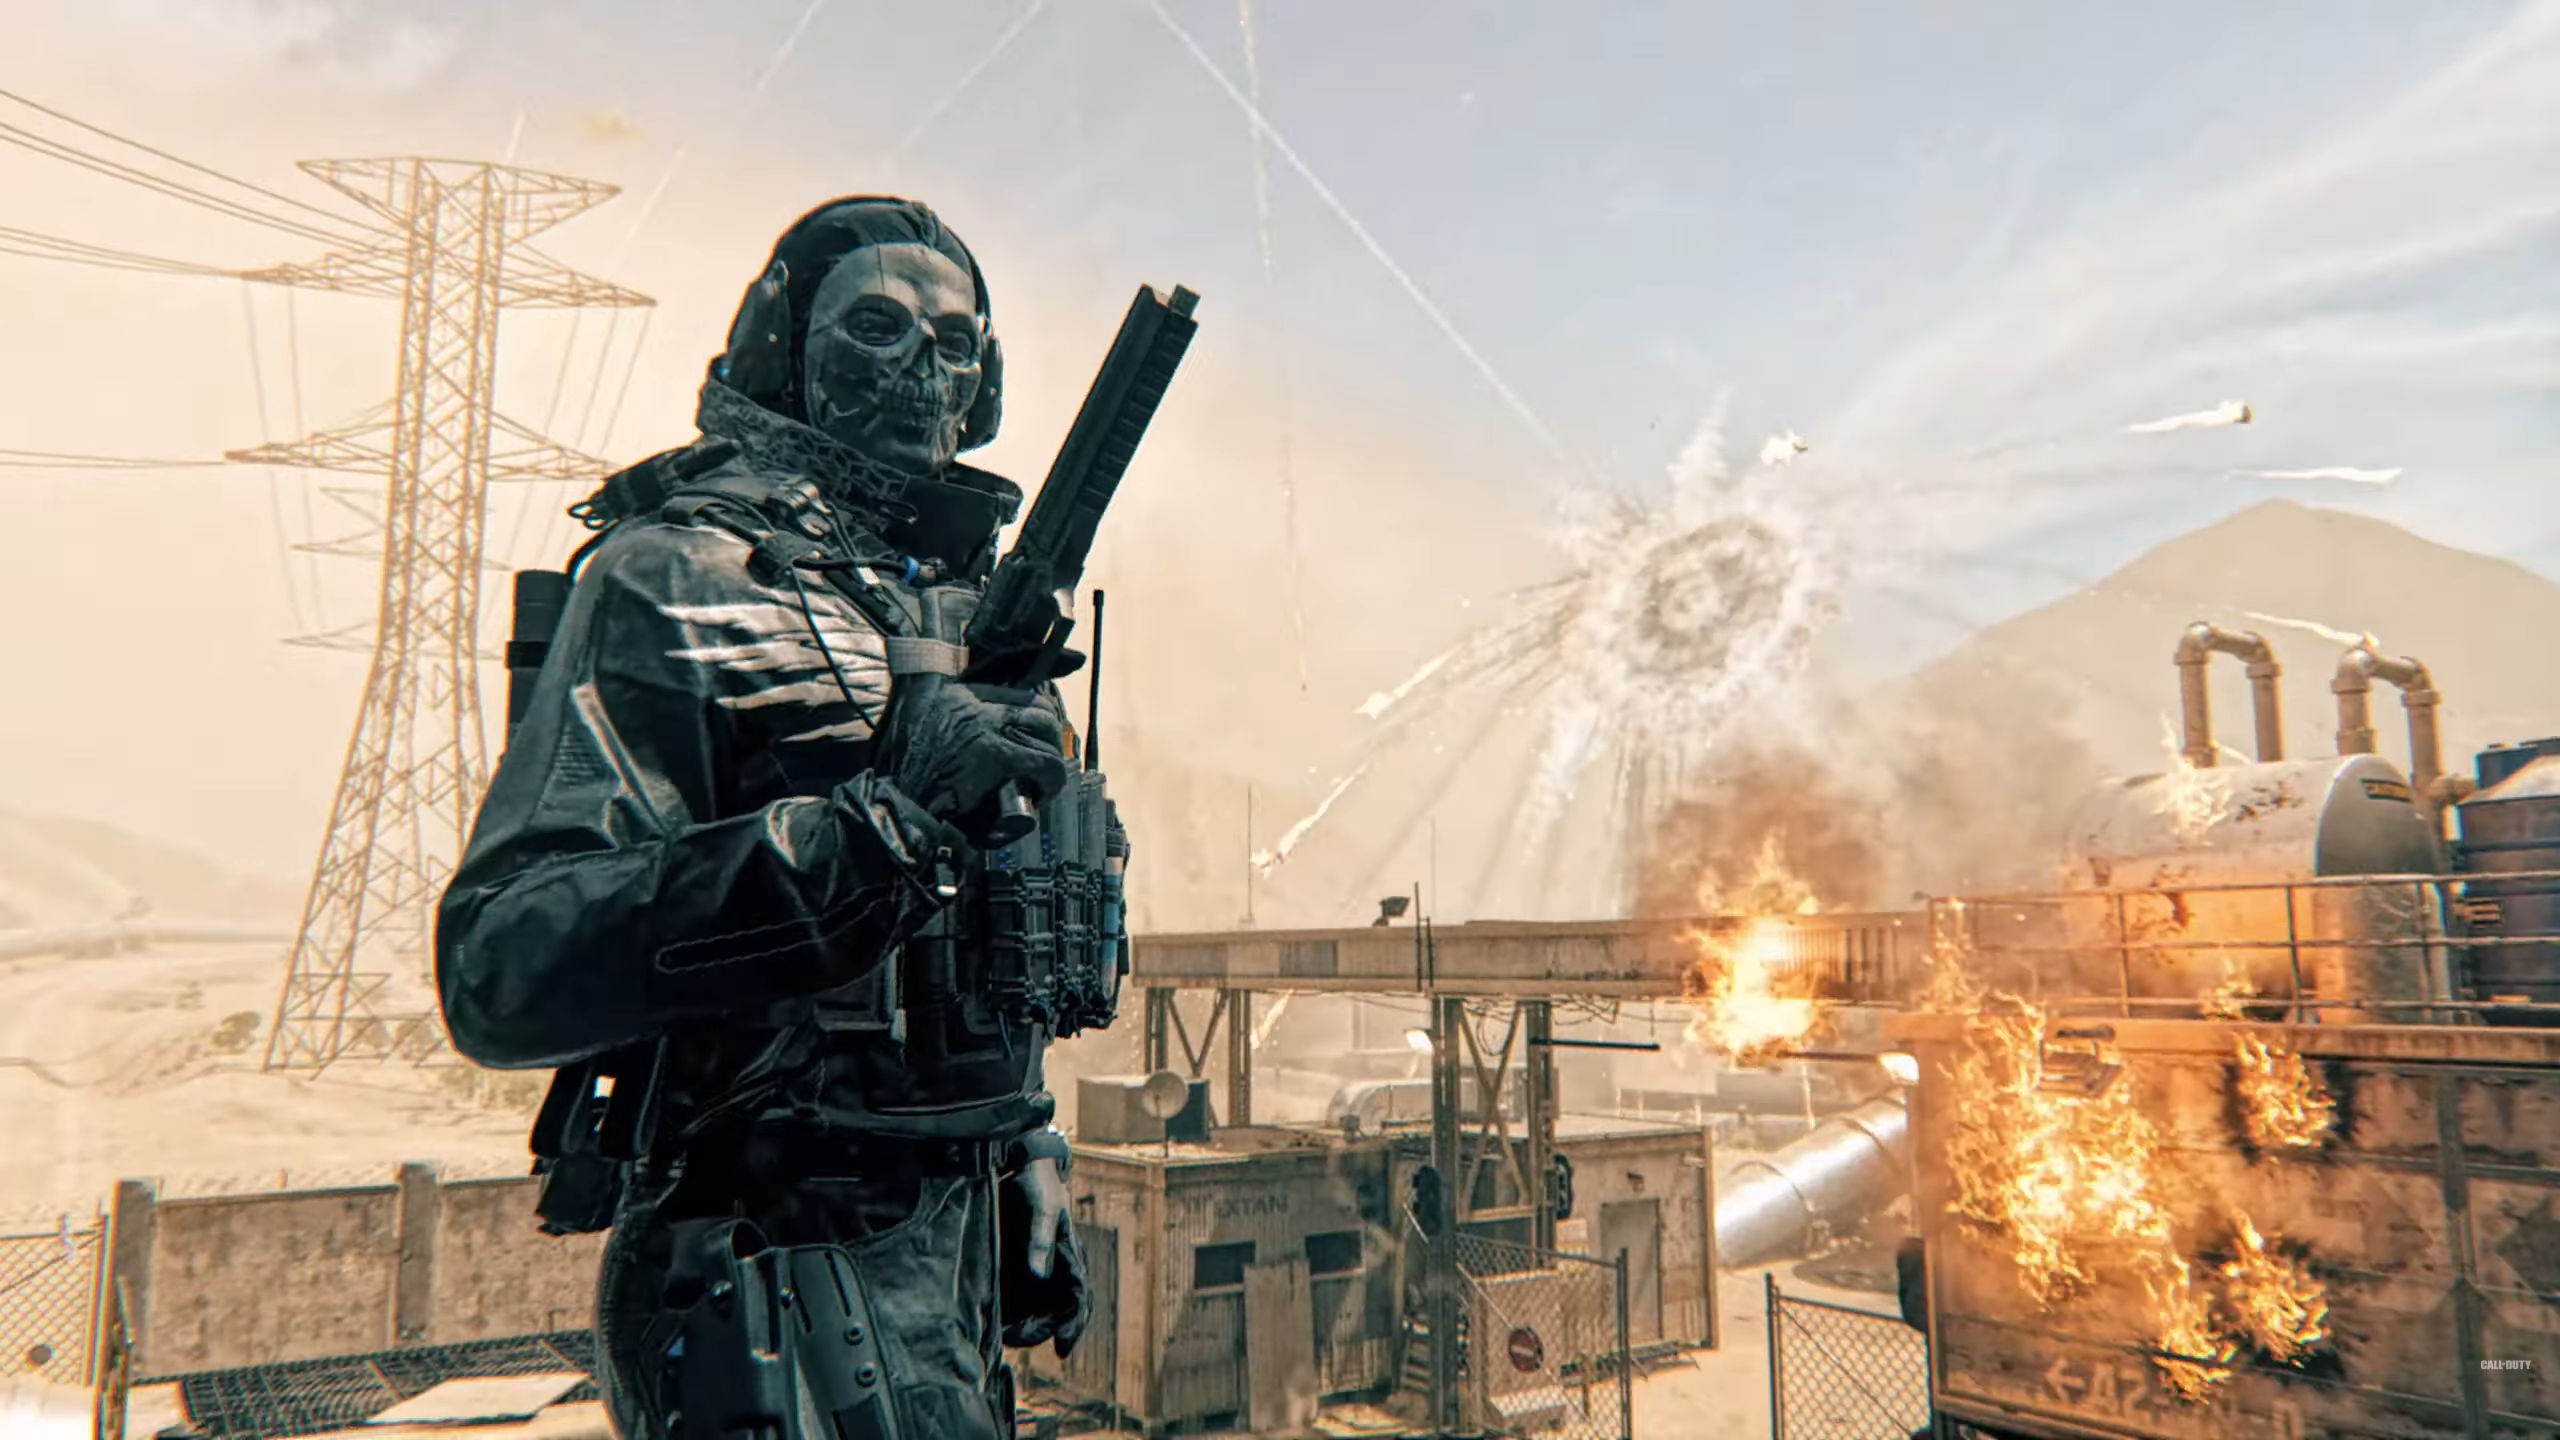 System requirements for Call of Duty: Modern Warfare 2 on PC revealed